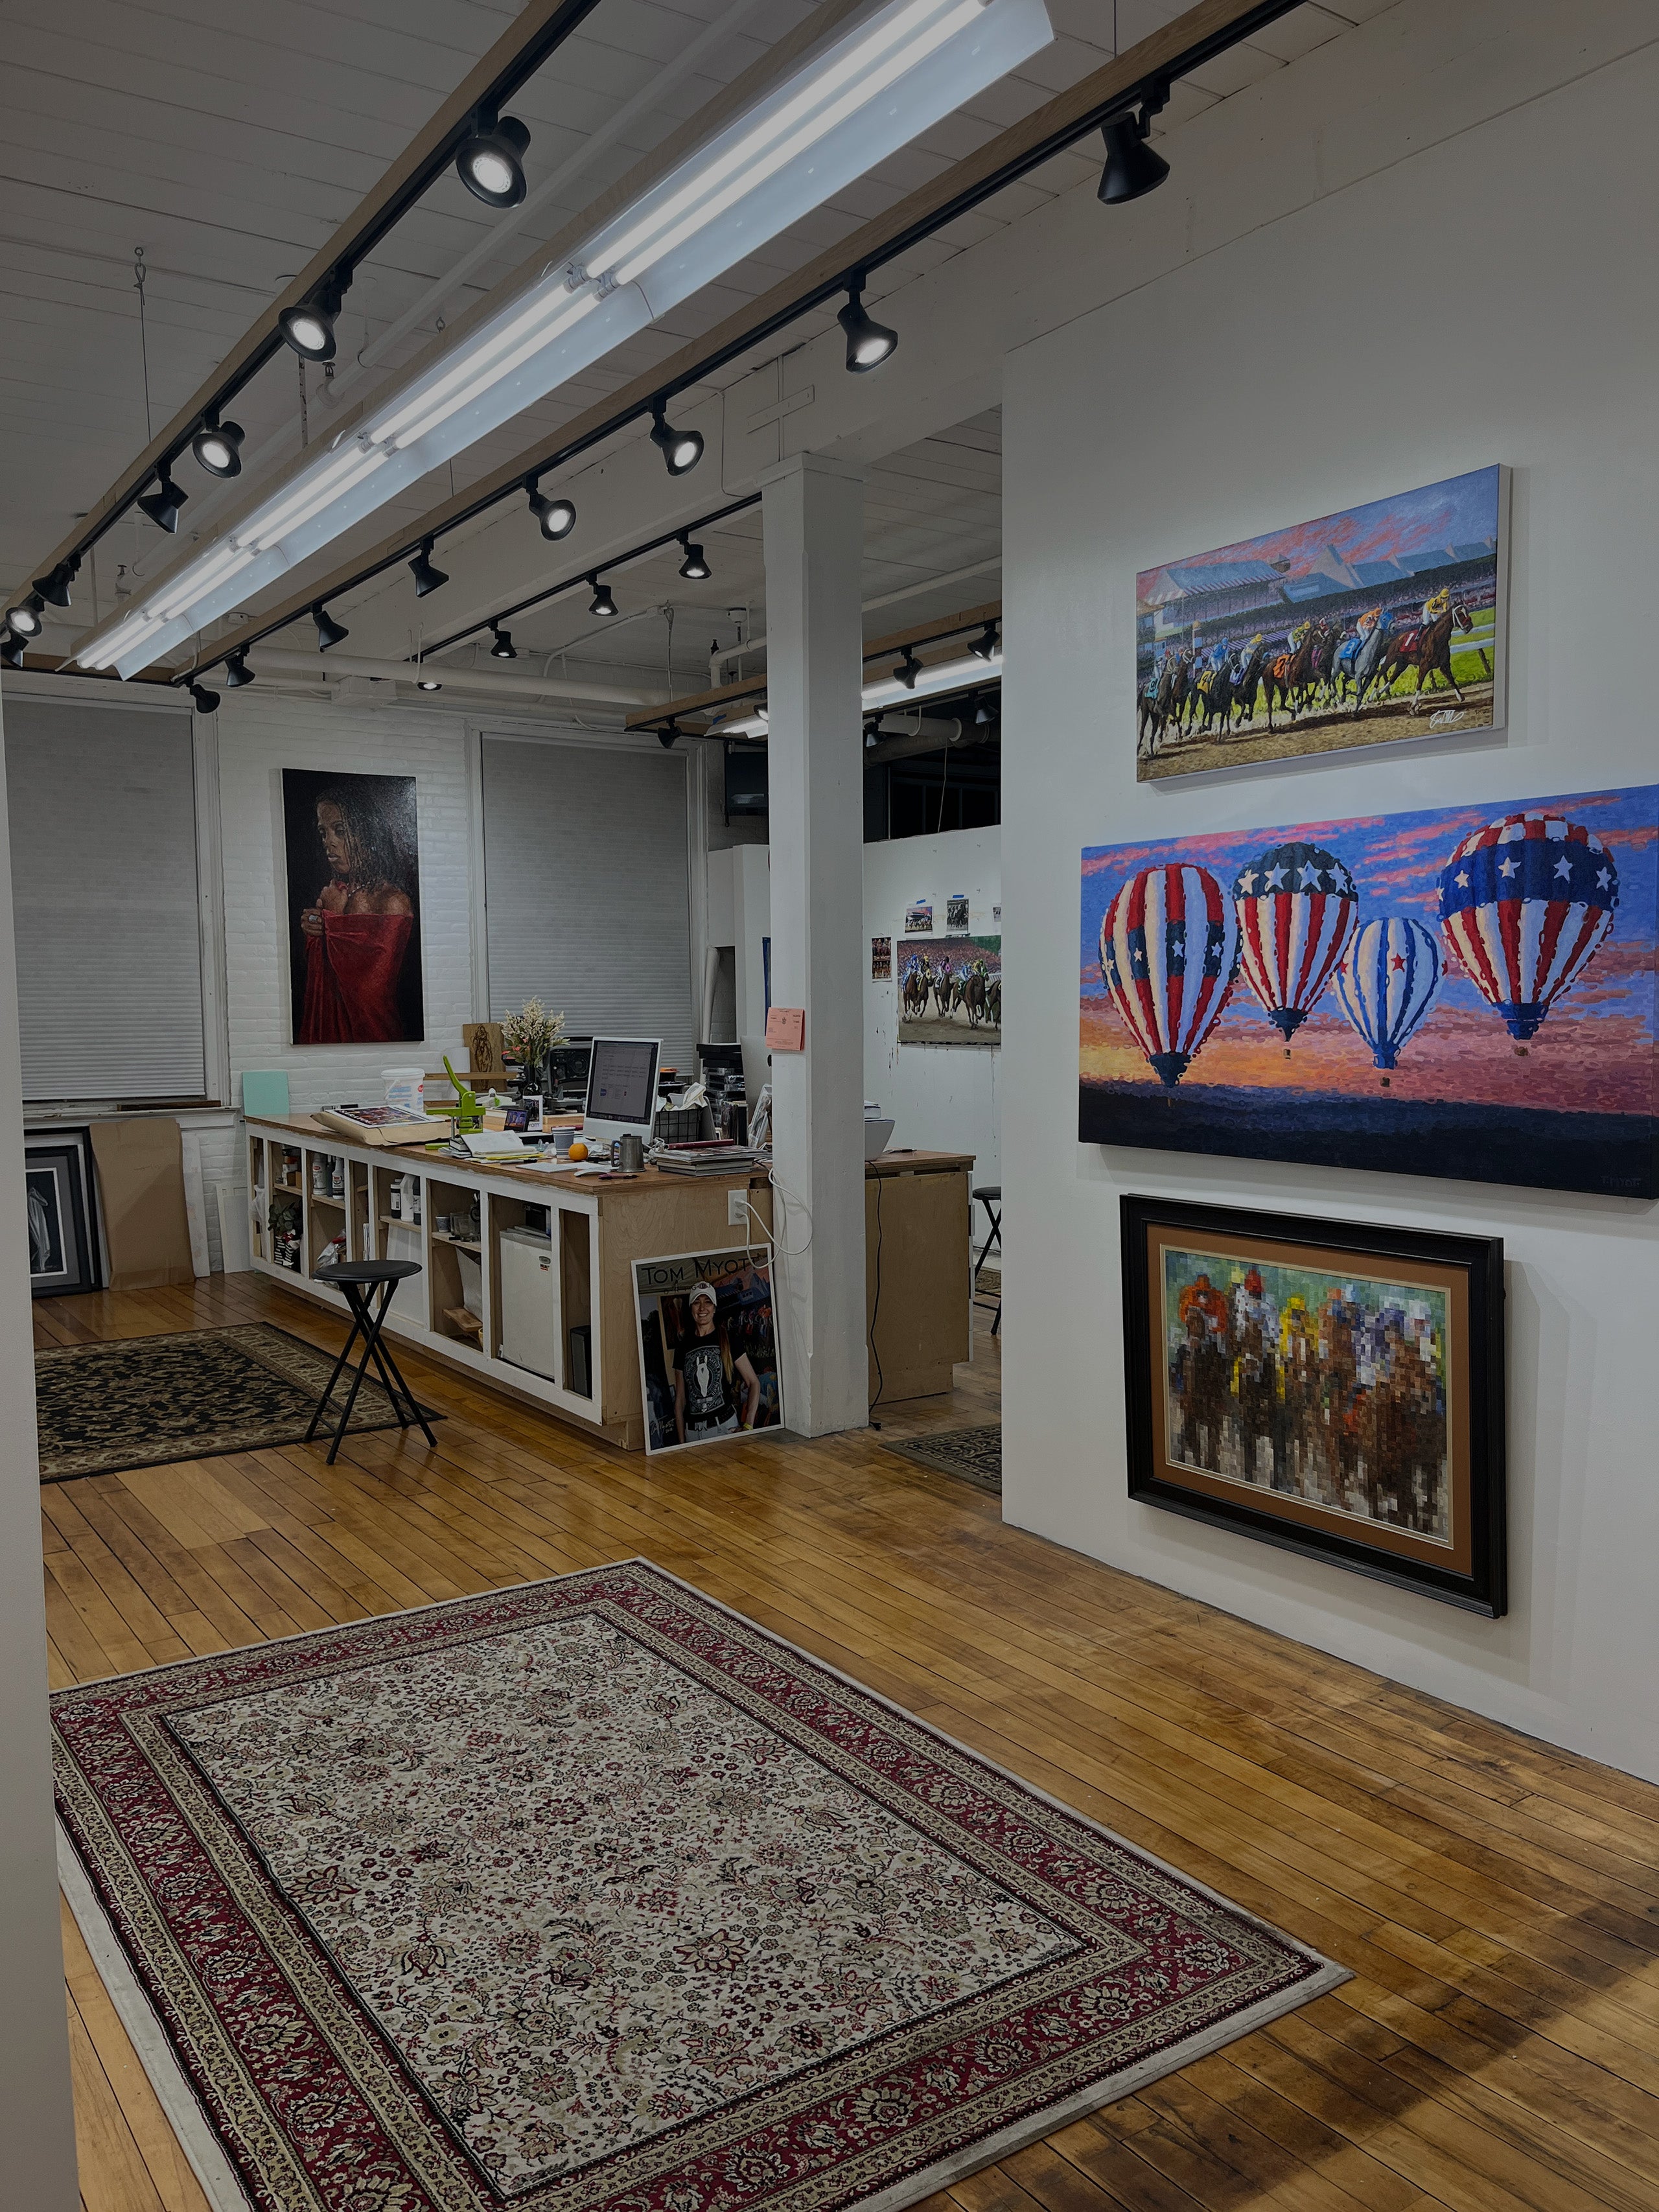 Interior view of Tom Myott's gallery and studio space located in The Shirt Factory in Glens Falls, NY. The studio is well-lit with track lighting and features a polished hardwood floor with a large ornate area rug. Various artworks are displayed on the white walls, including a prominent painting of hot air balloons with American flag motifs. The workspace contains a desk with a computer, art supplies, and canvases, creating a creative and productive atmosphere.